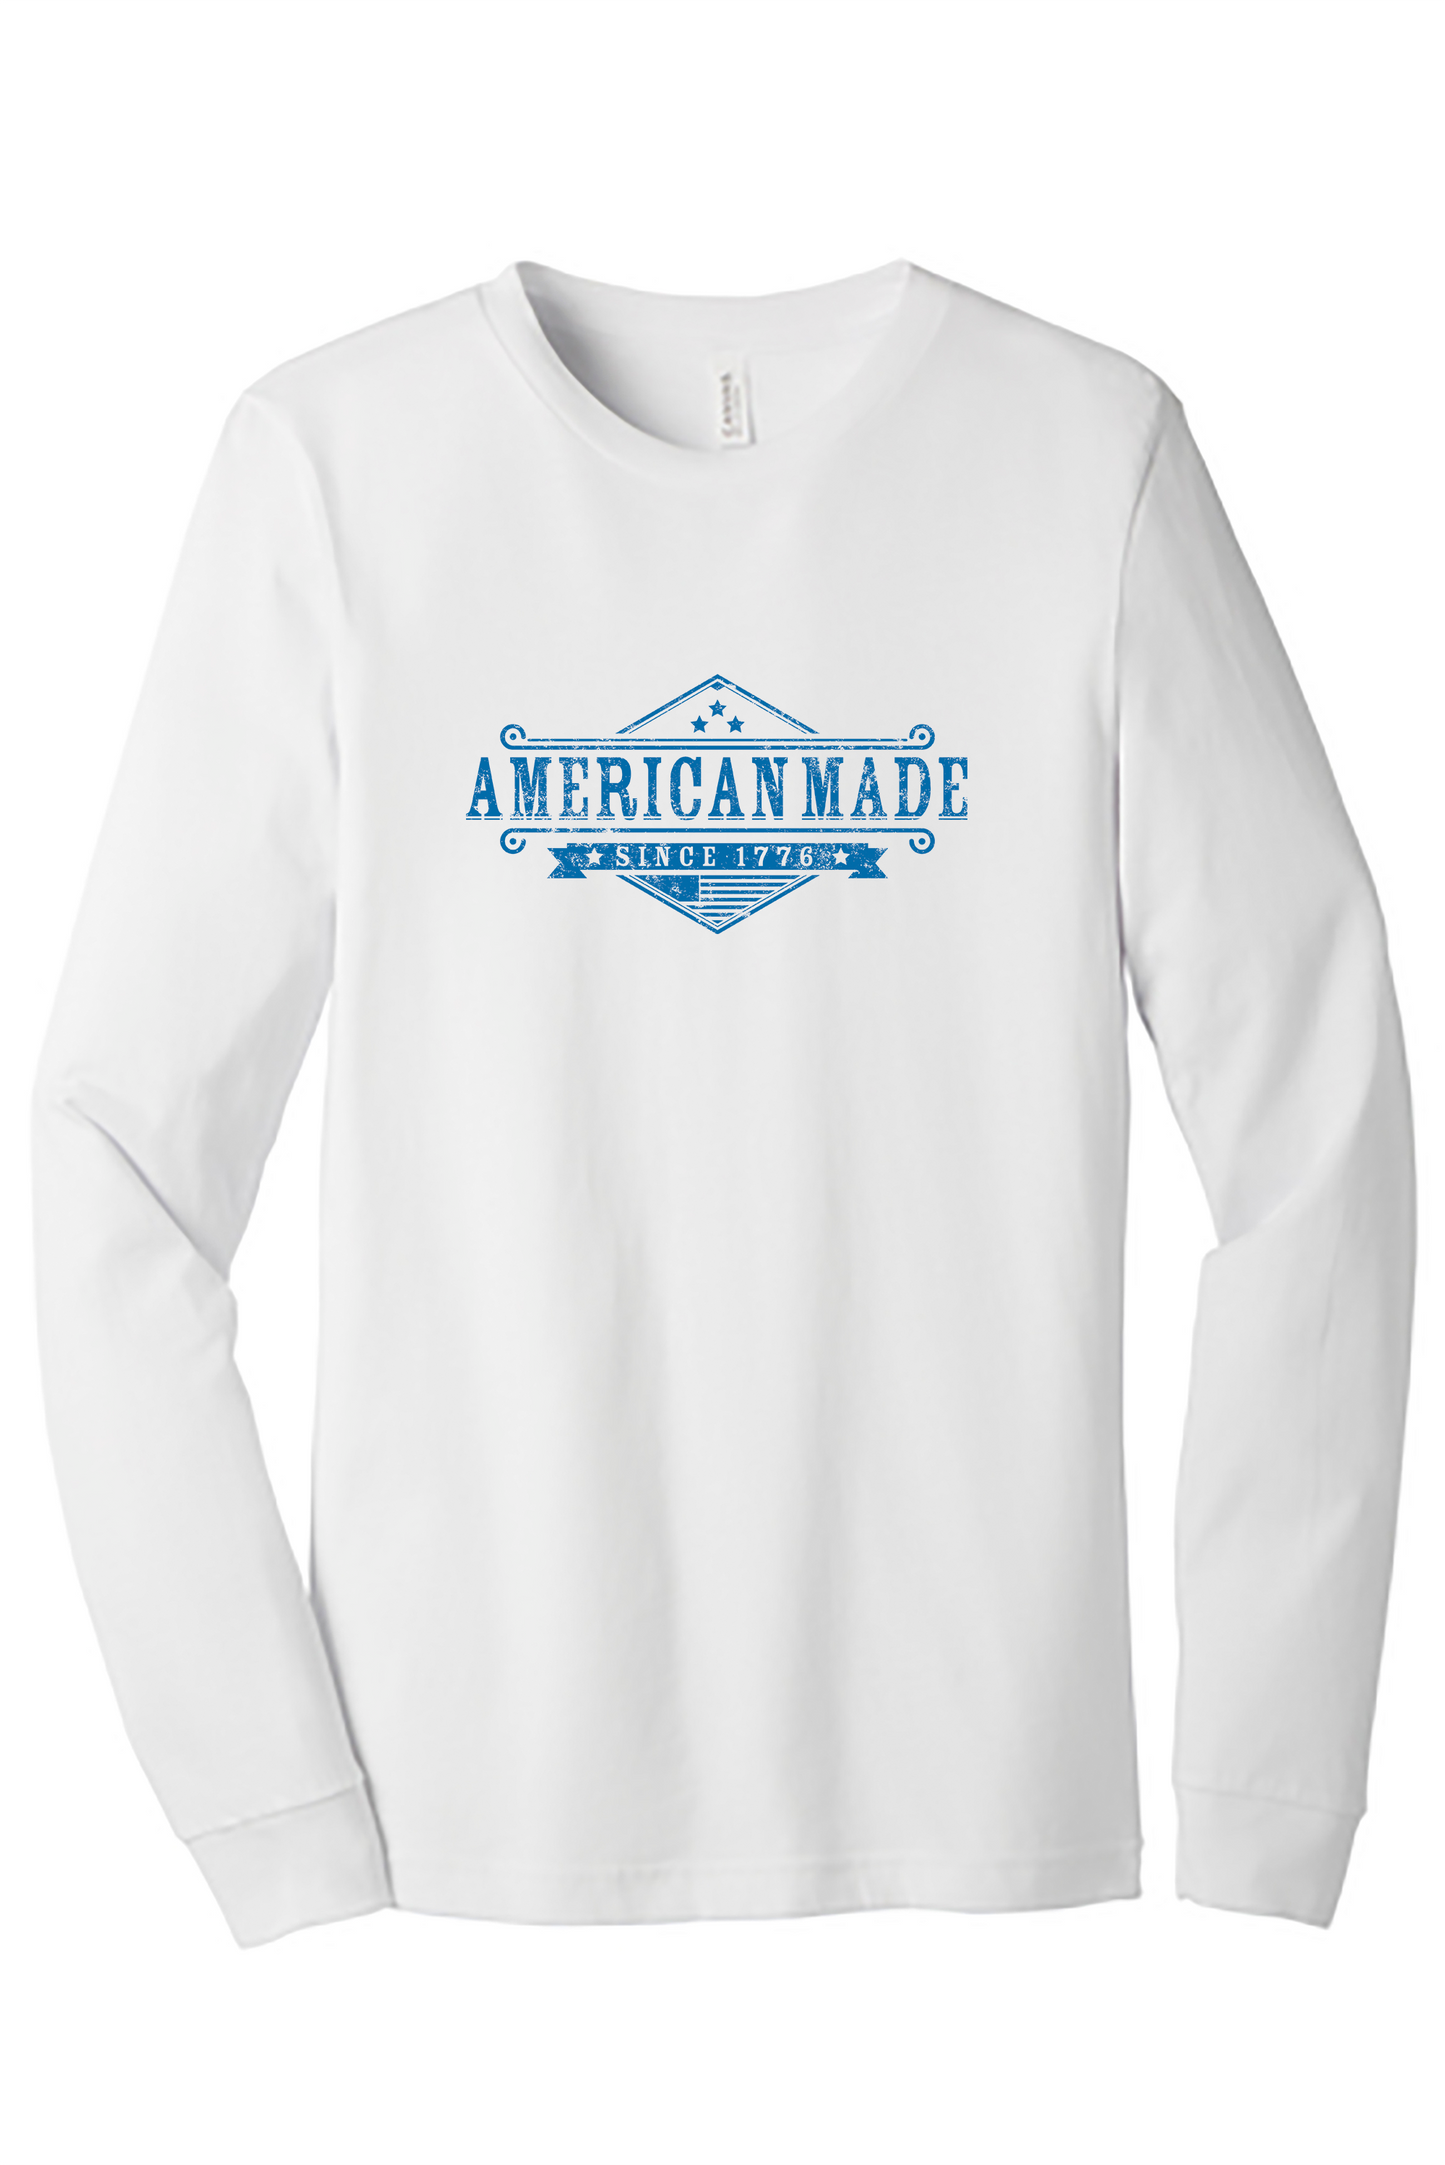 A PLACE TO REMEMBER® American Made Patriotic Unisex Jersey Tee